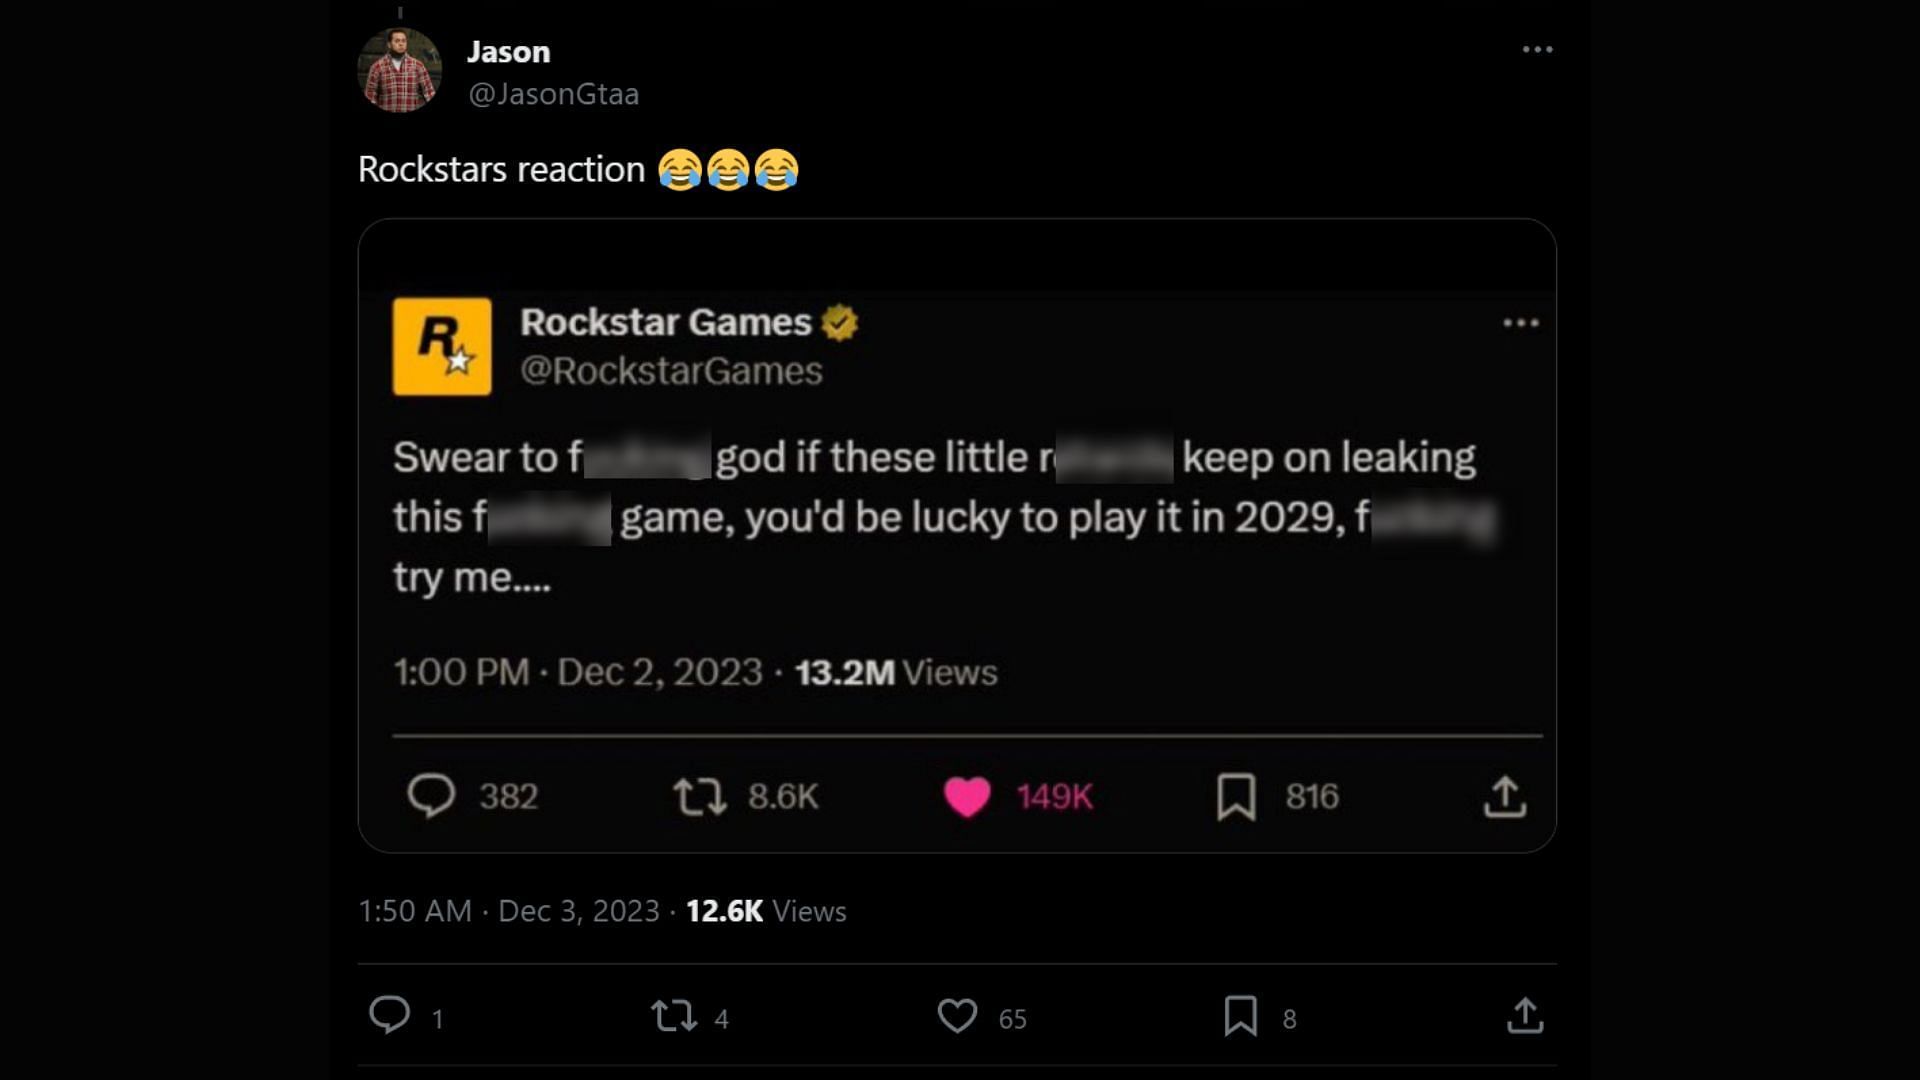 Fans are making fun of how Rockstar would react to the leak (Image via X/@JasonGtaa)